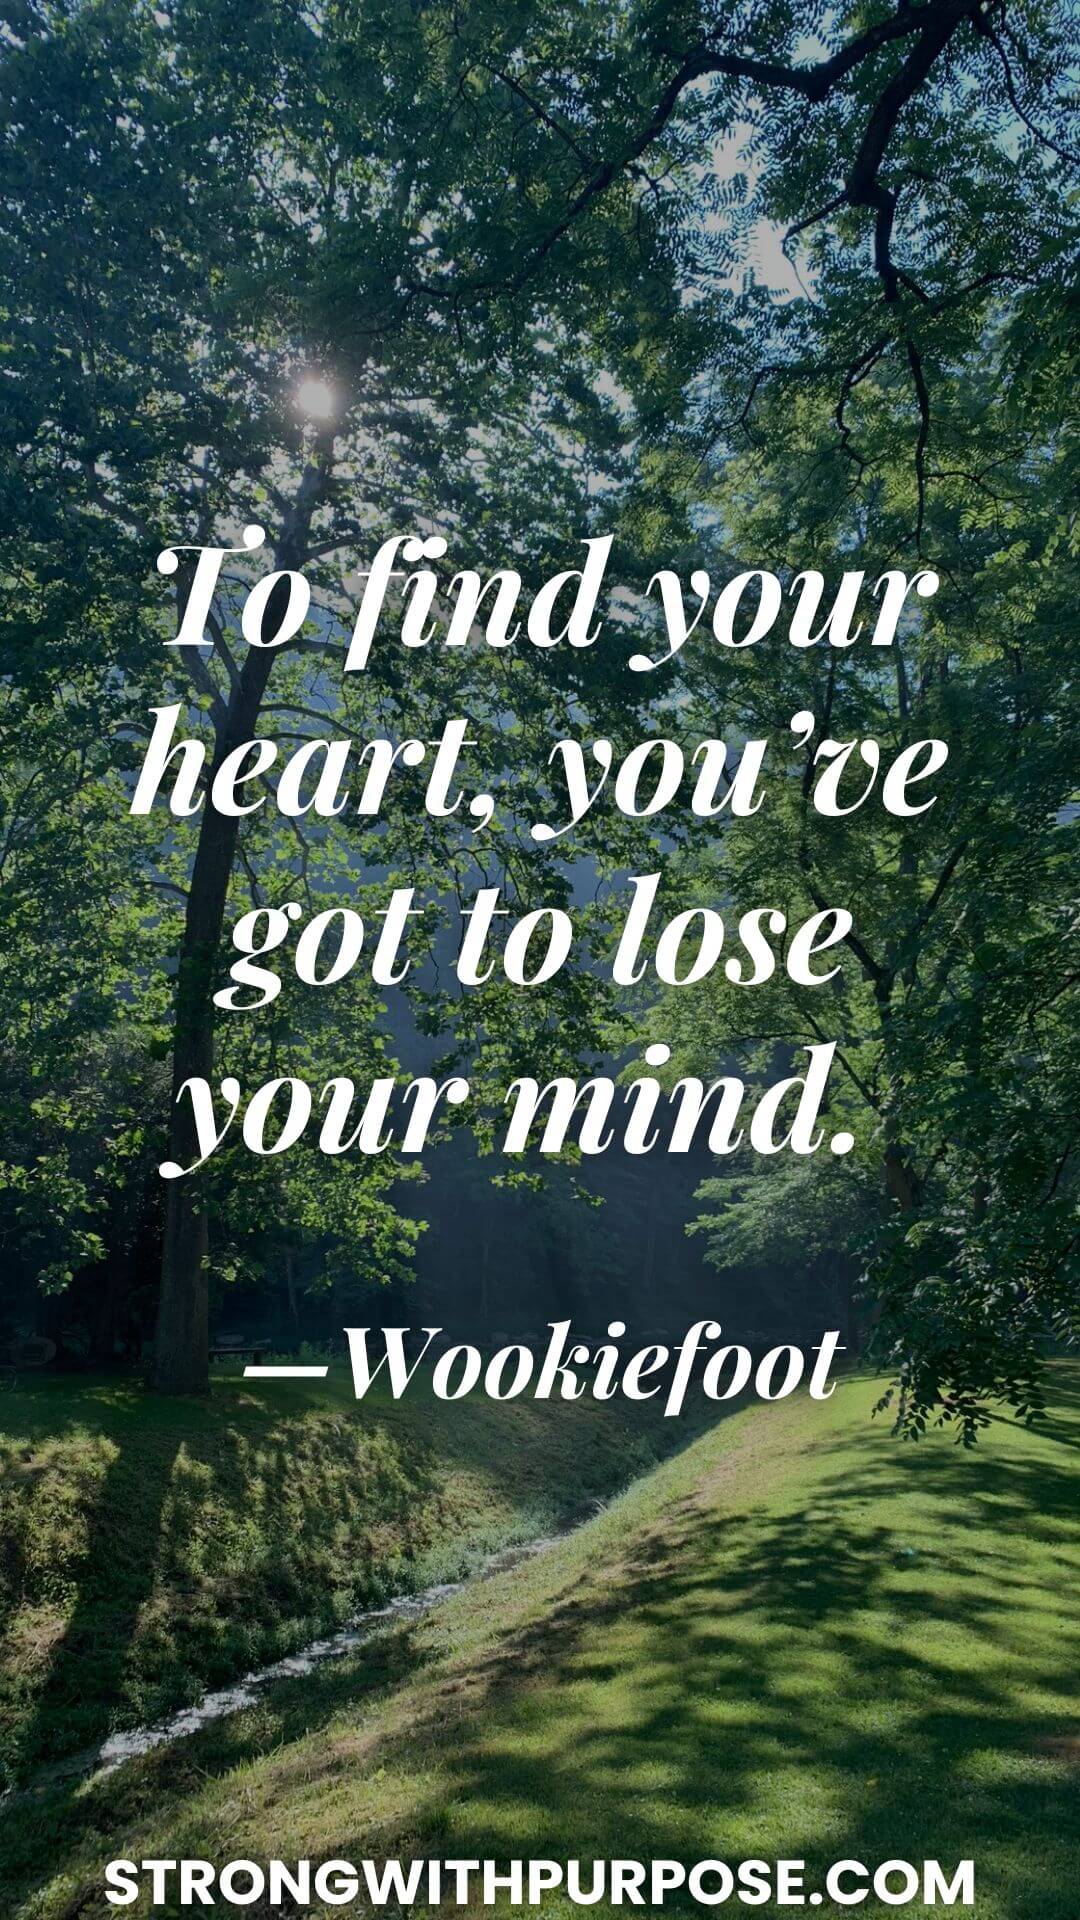 To find your heart you've got to lose your mind - Lose Your Mind Lyrics by Wookiefoot - Strong with Purpose